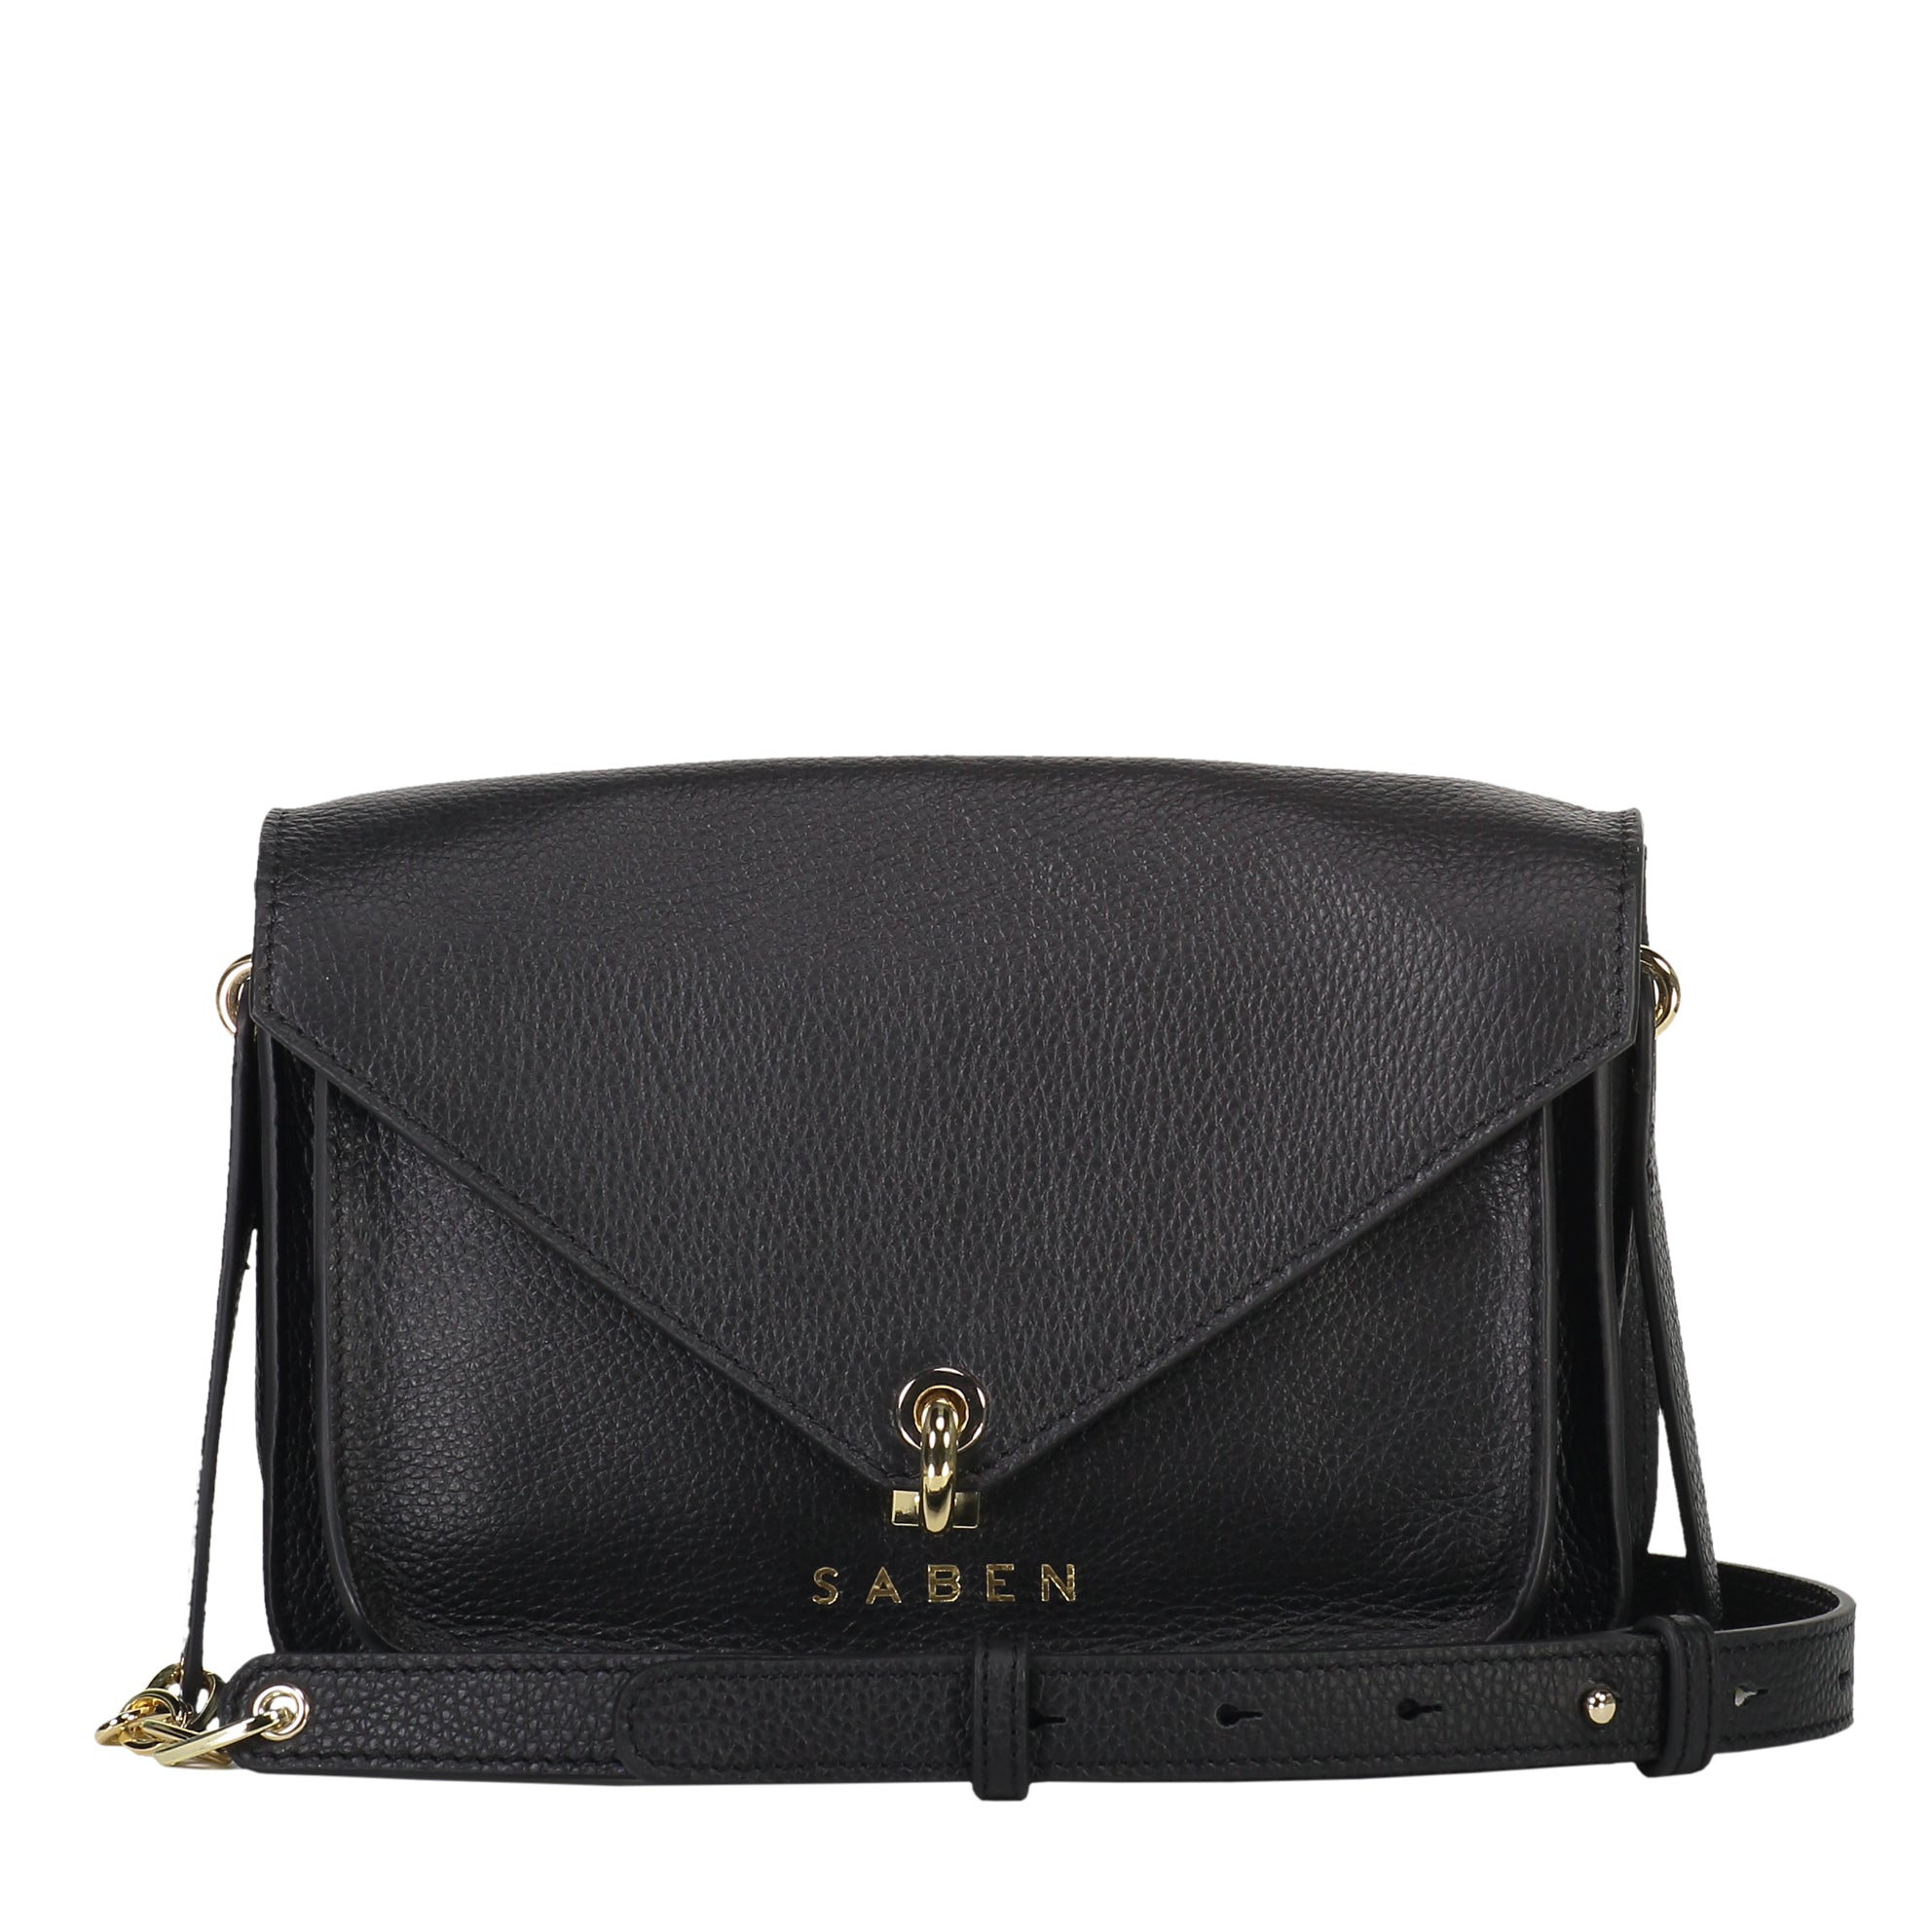 saben handbag kaya black in designed in new zealand and made out of leather 